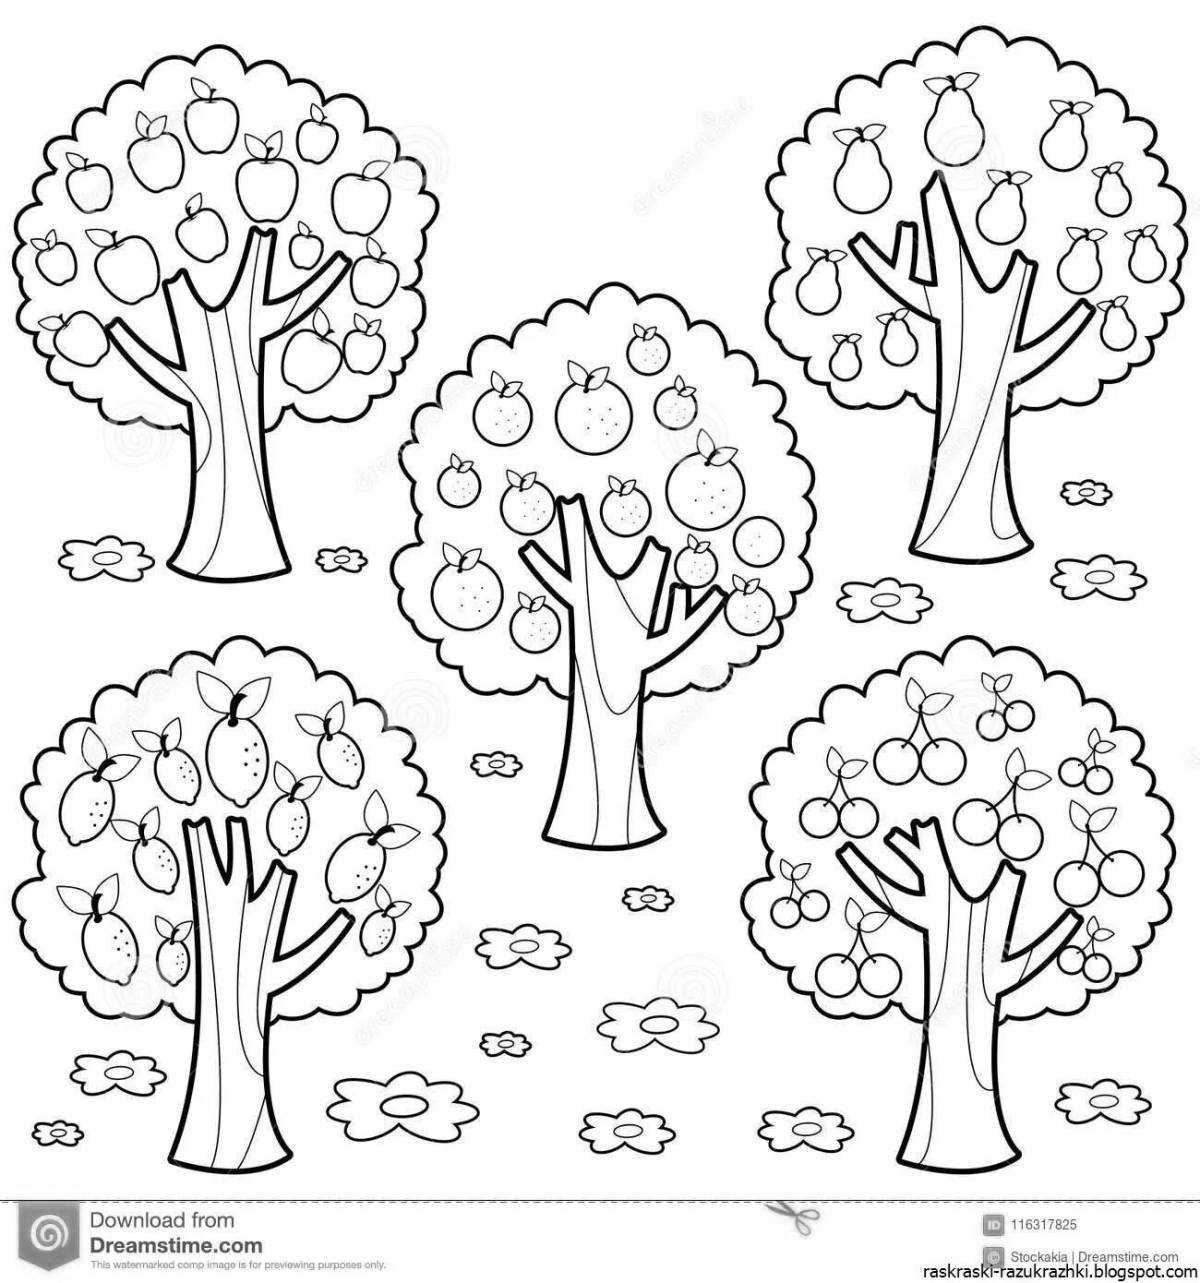 Glowing garden coloring book for kids